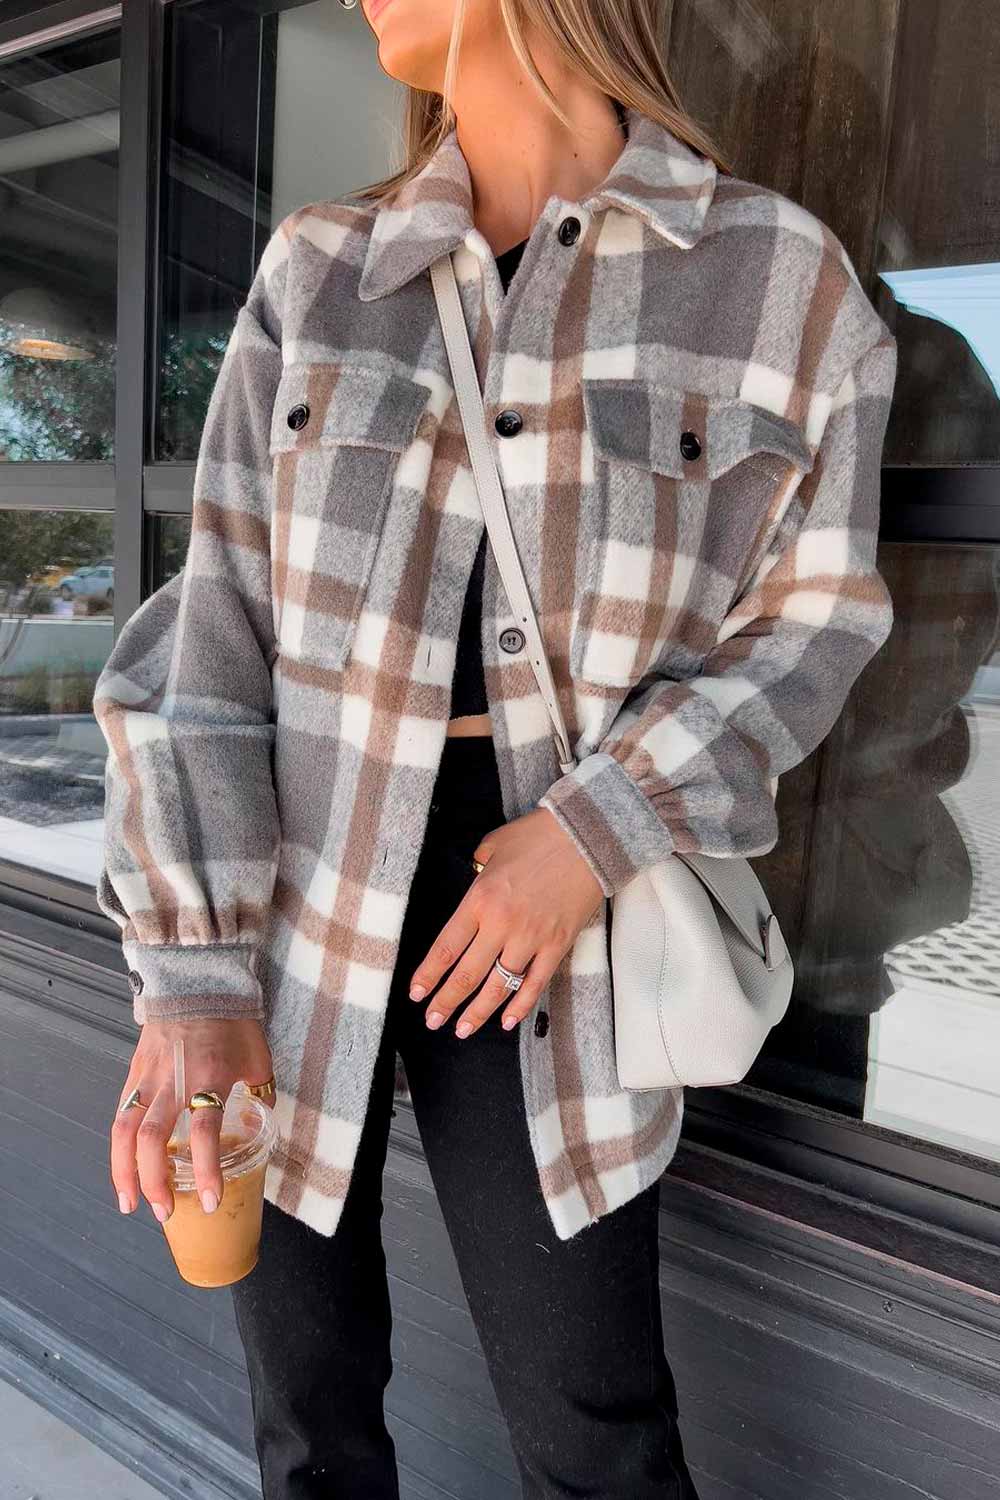 Plaid Jacket With Jeans Outfit